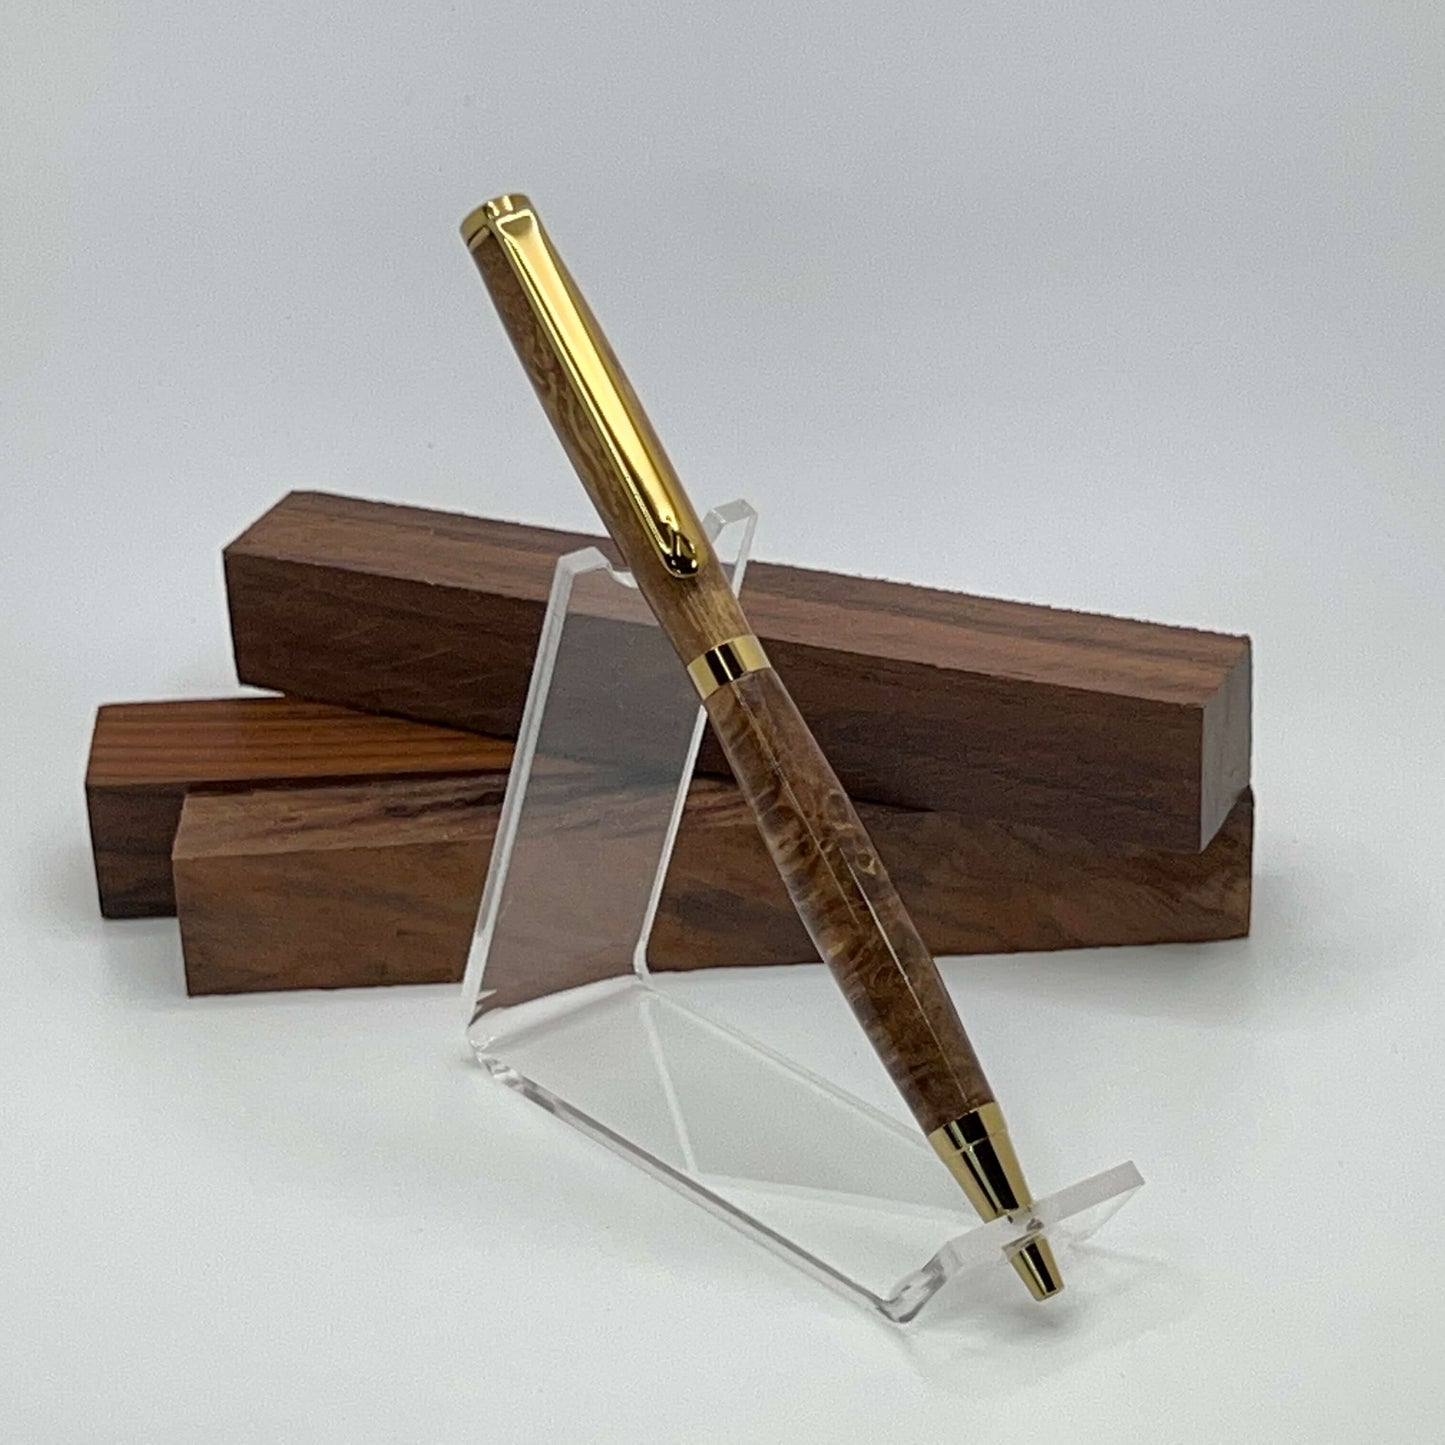 Handcrafted pen with Box Elder Burl wood dyed brown and gold titanium hardware